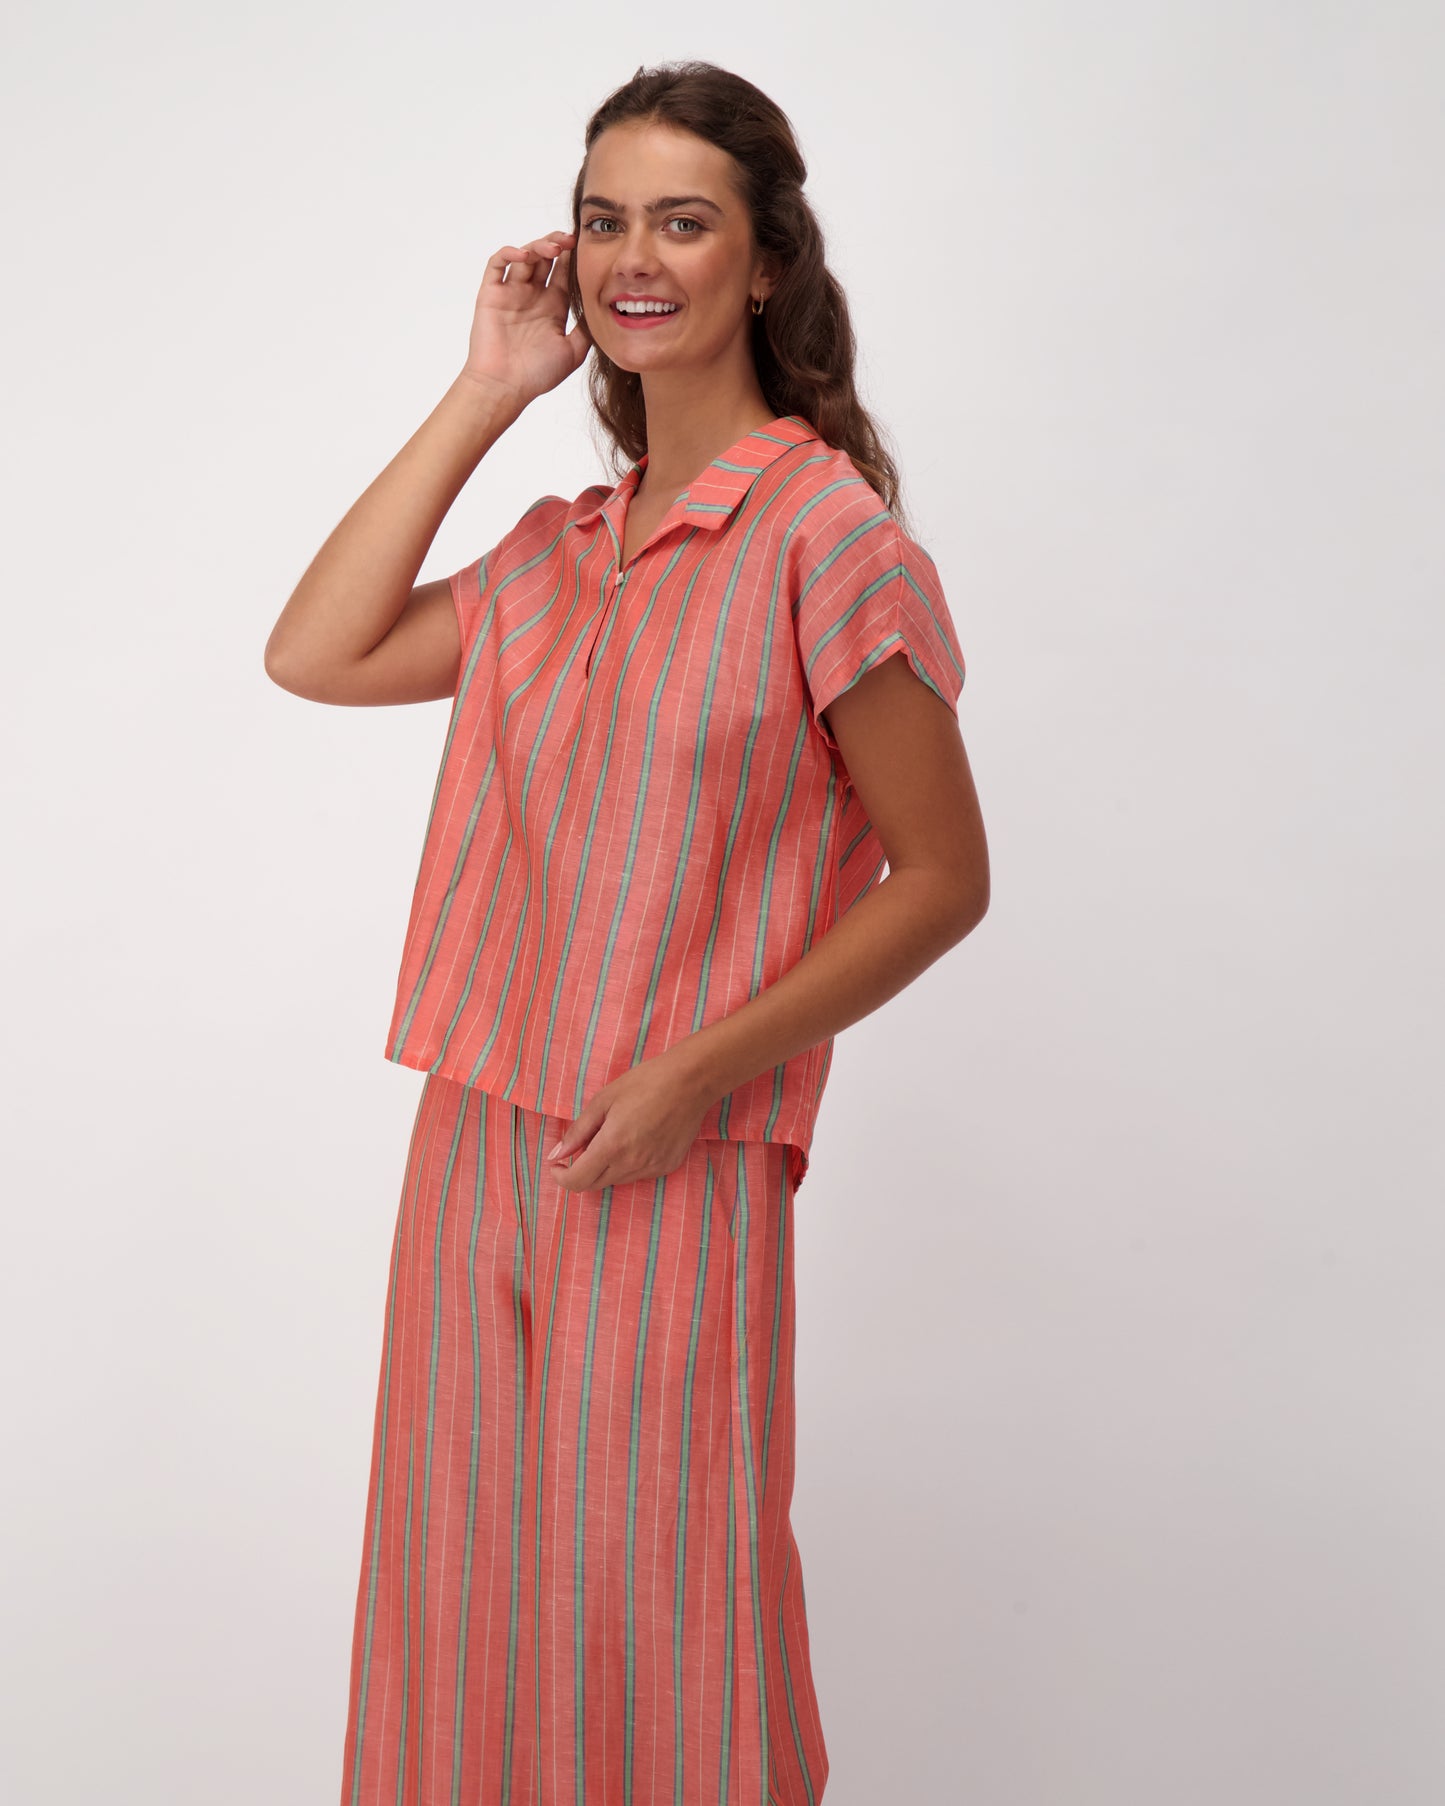 Coral Linen Blend Shirt Top, Yarn Dyed Stripes